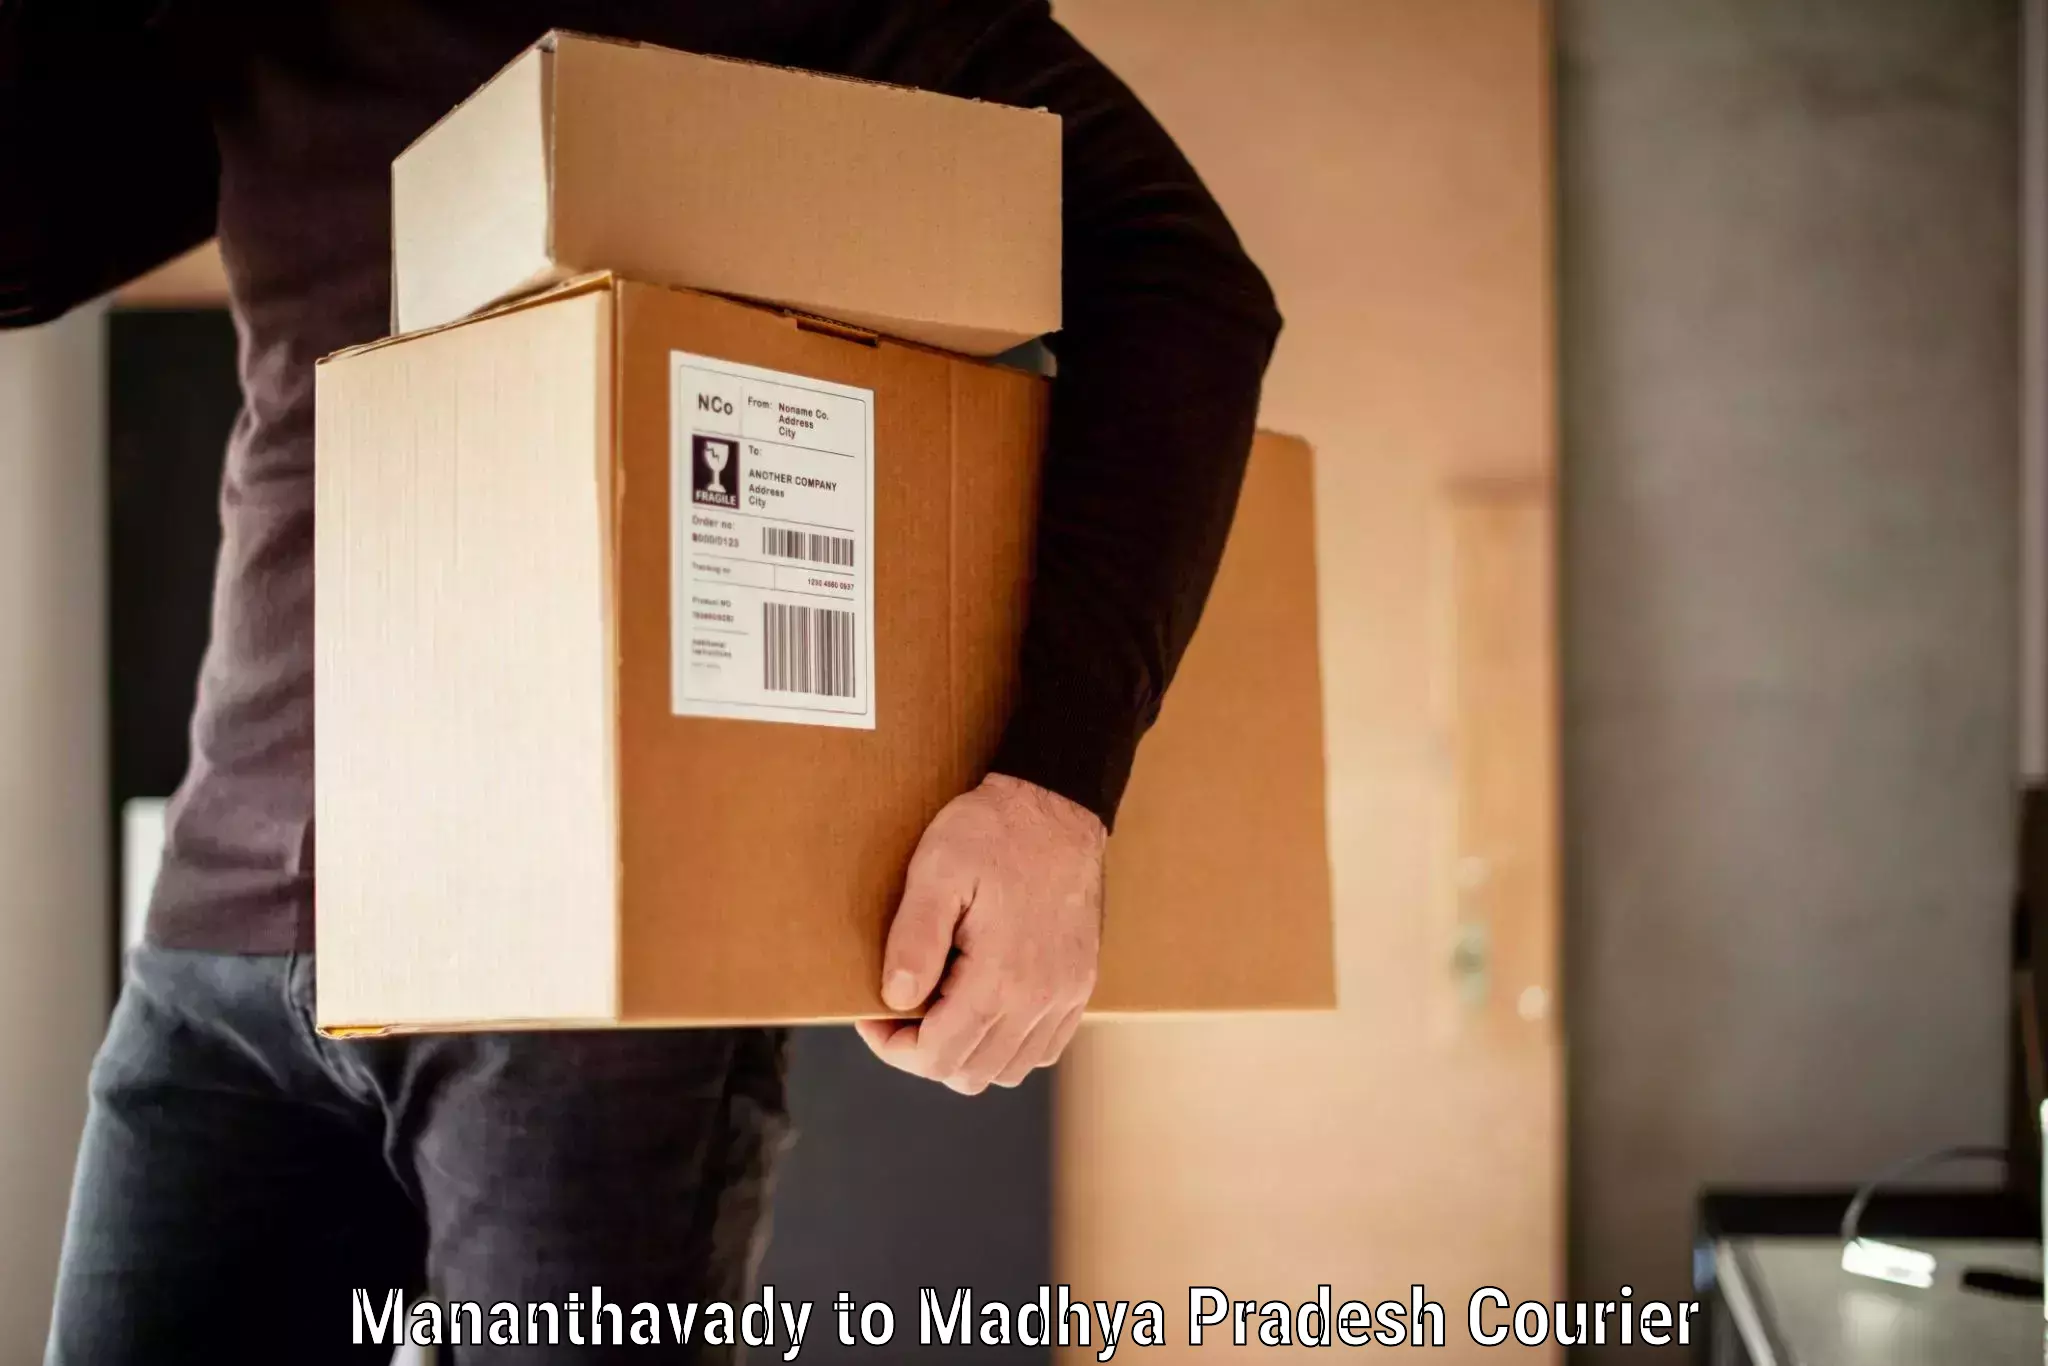 Baggage relocation service Mananthavady to Jaisinghnagar